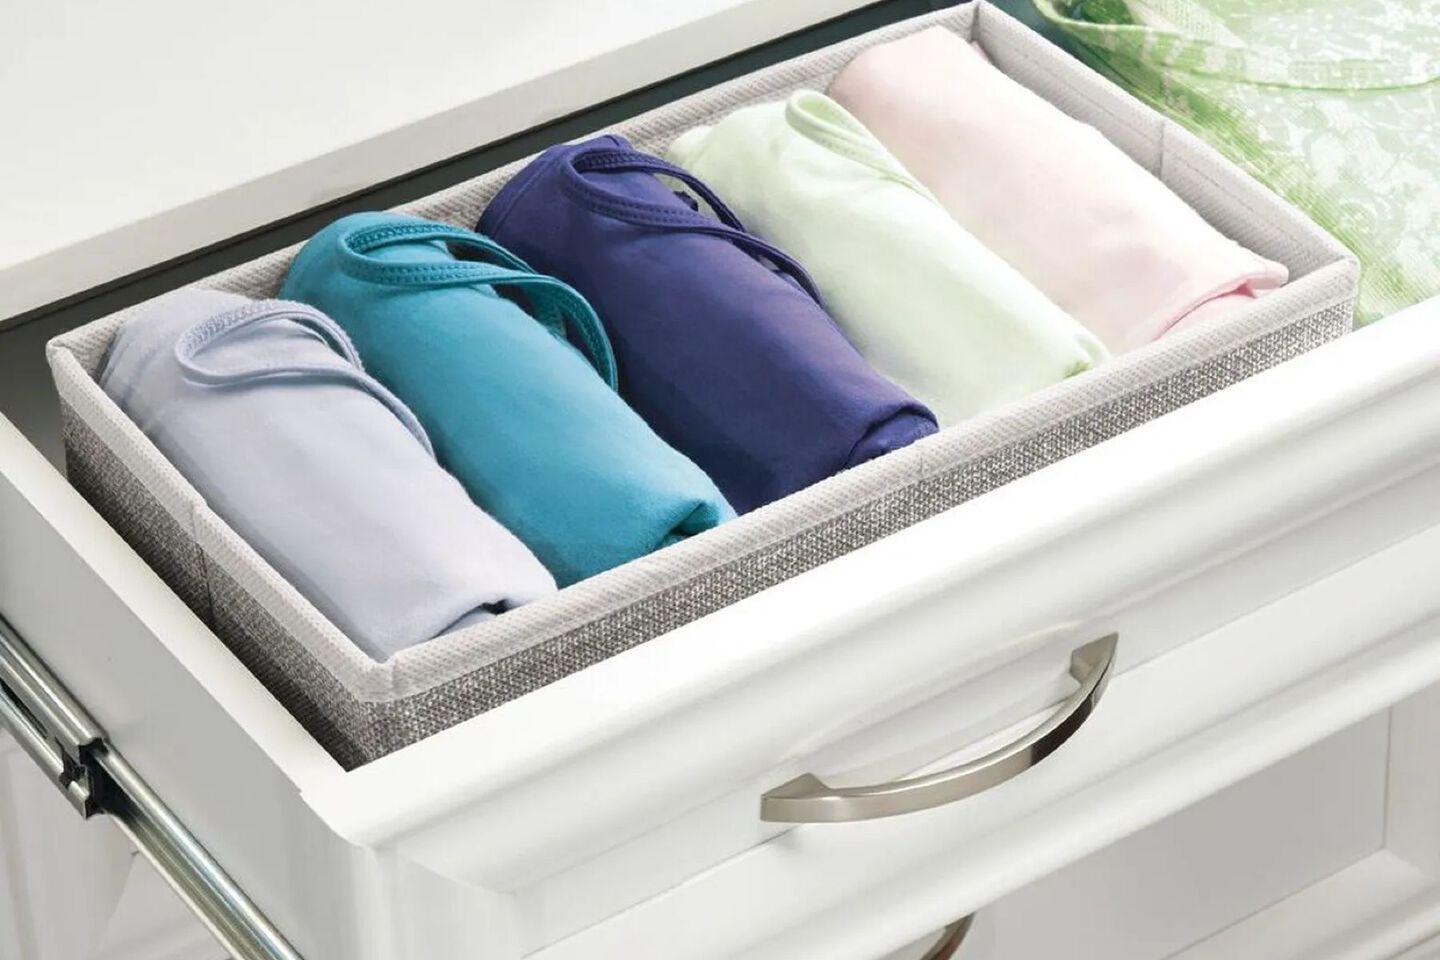 White open drawer with a grey basket inside filled with rolled clothing